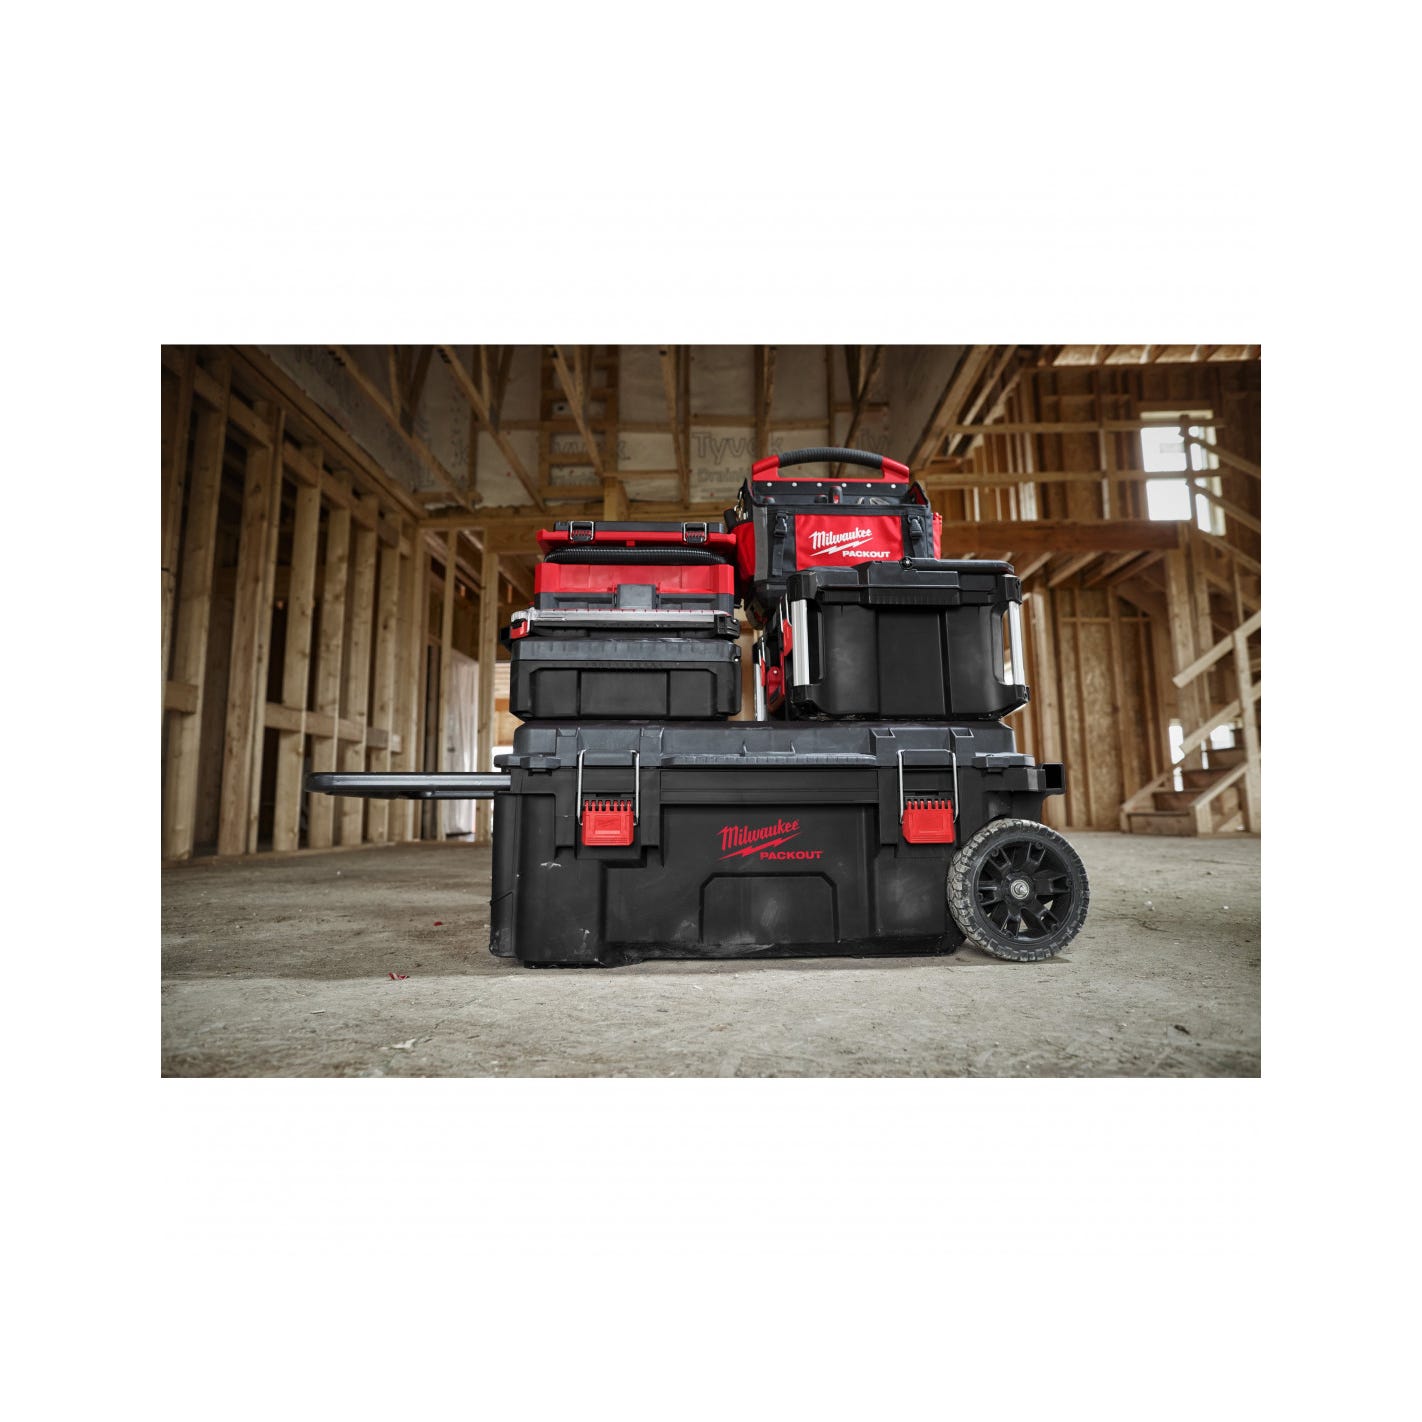 Caisse roulante PACKOUT ROLLING TOOL CHEST | 4932478161 - Milwaukee 4